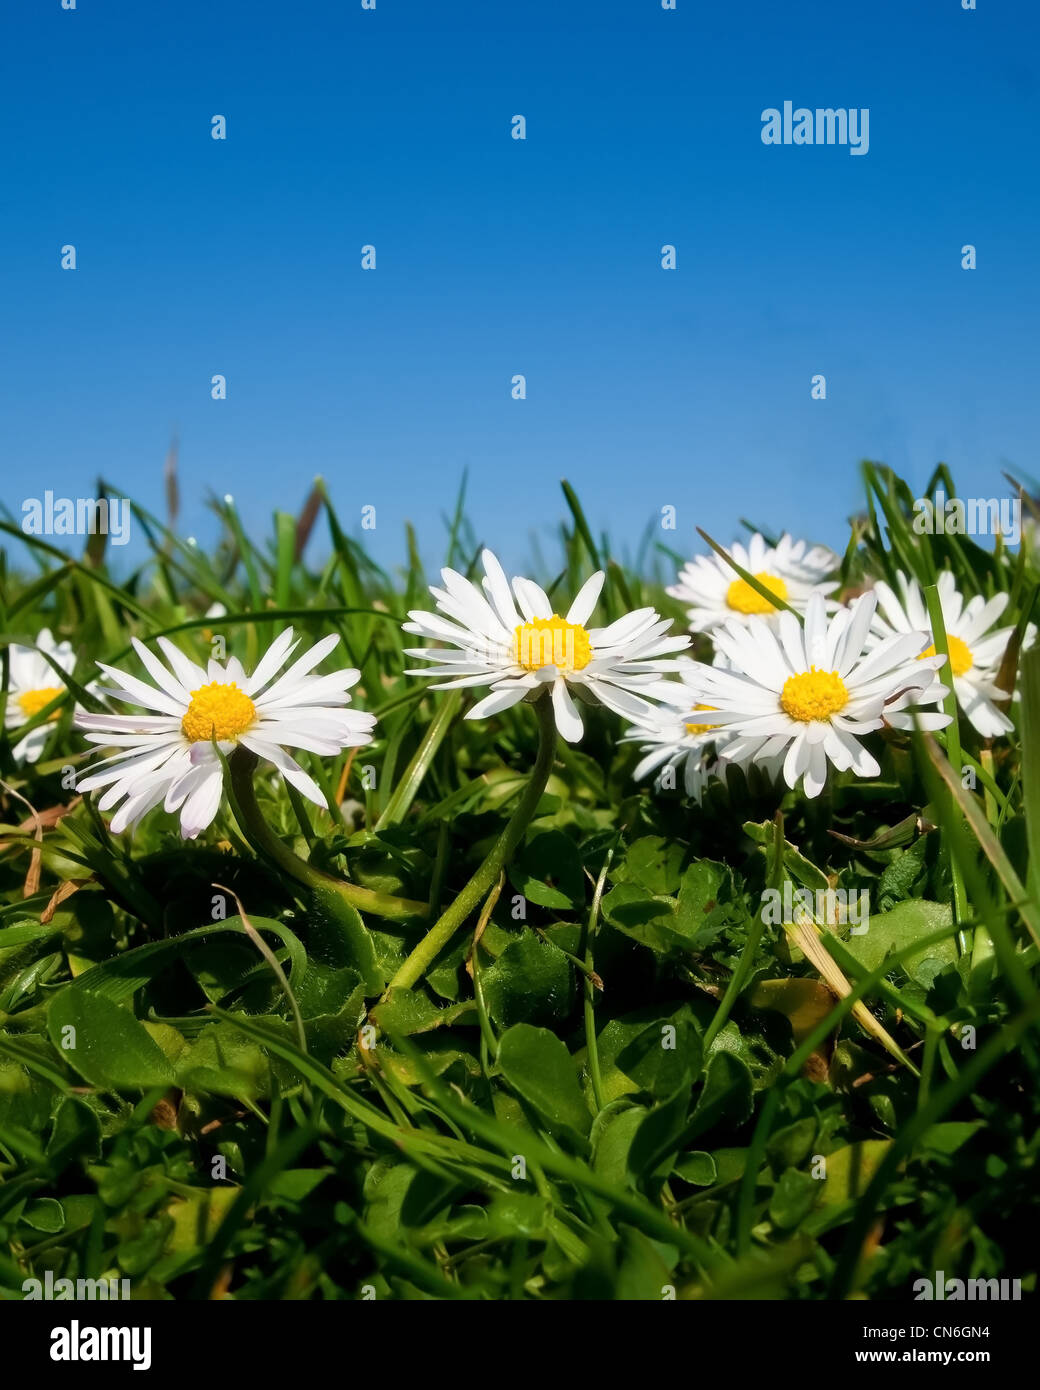 Wild daisy flowers in green grass against a blue sky Stock Photo